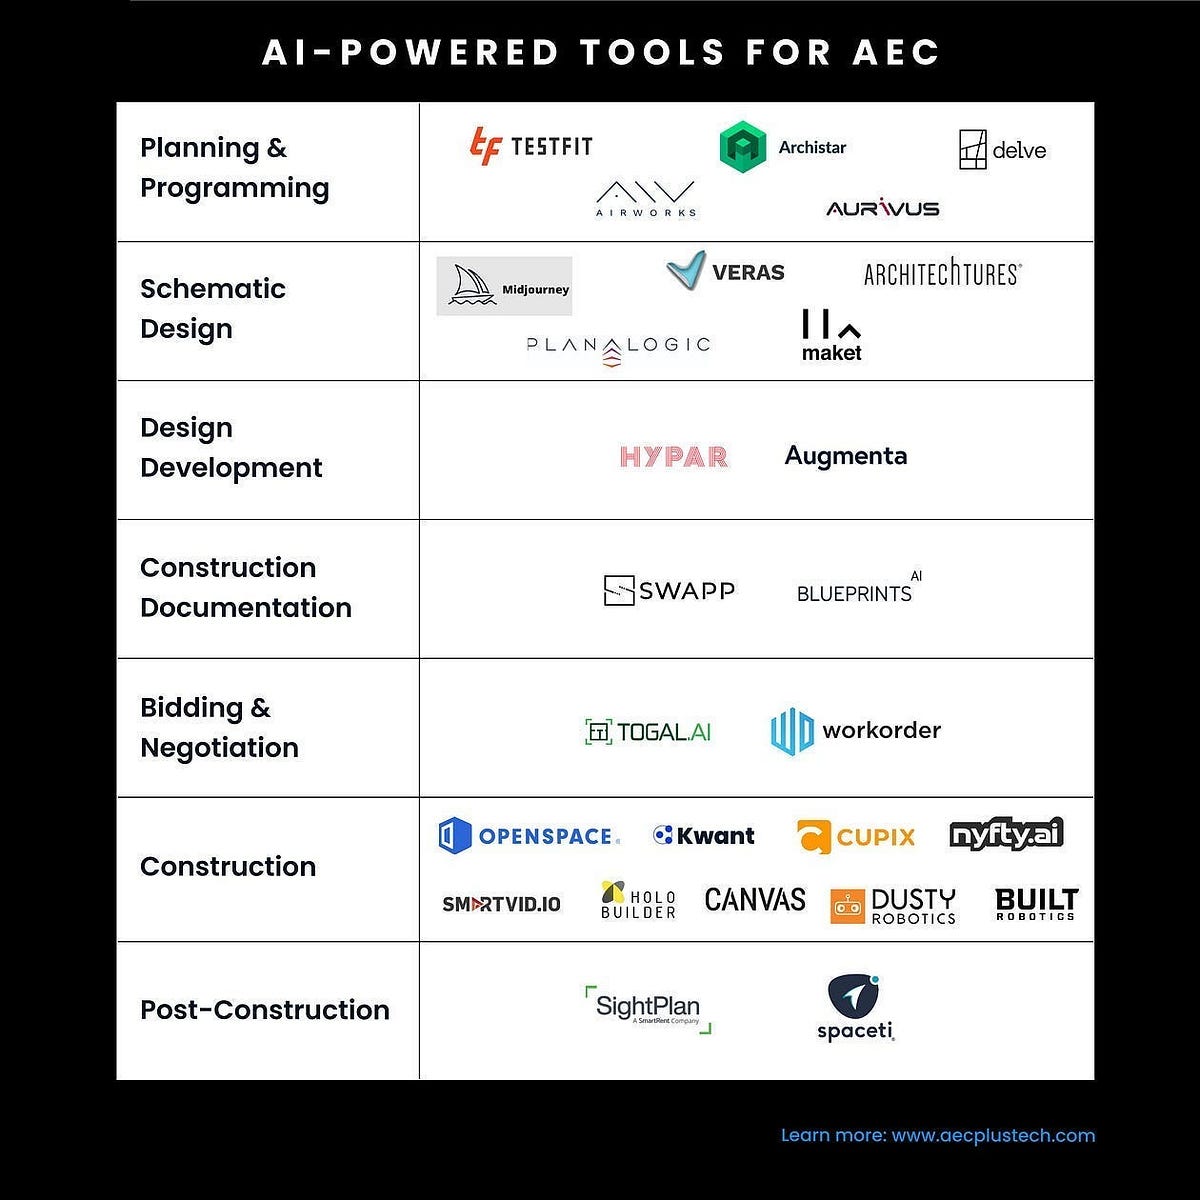 Top AI-Powered Tools for the Building Industry | by aec+tech | Aug, 2023 

6. Construction PhaseAI-powered tools like Smartvid.io and OpenSpace have made signifi...> Read more: elblogdefamosas.com/top-ai-powered…
#aectech #aiwritingtools #AIpowered #Aug #Bu...